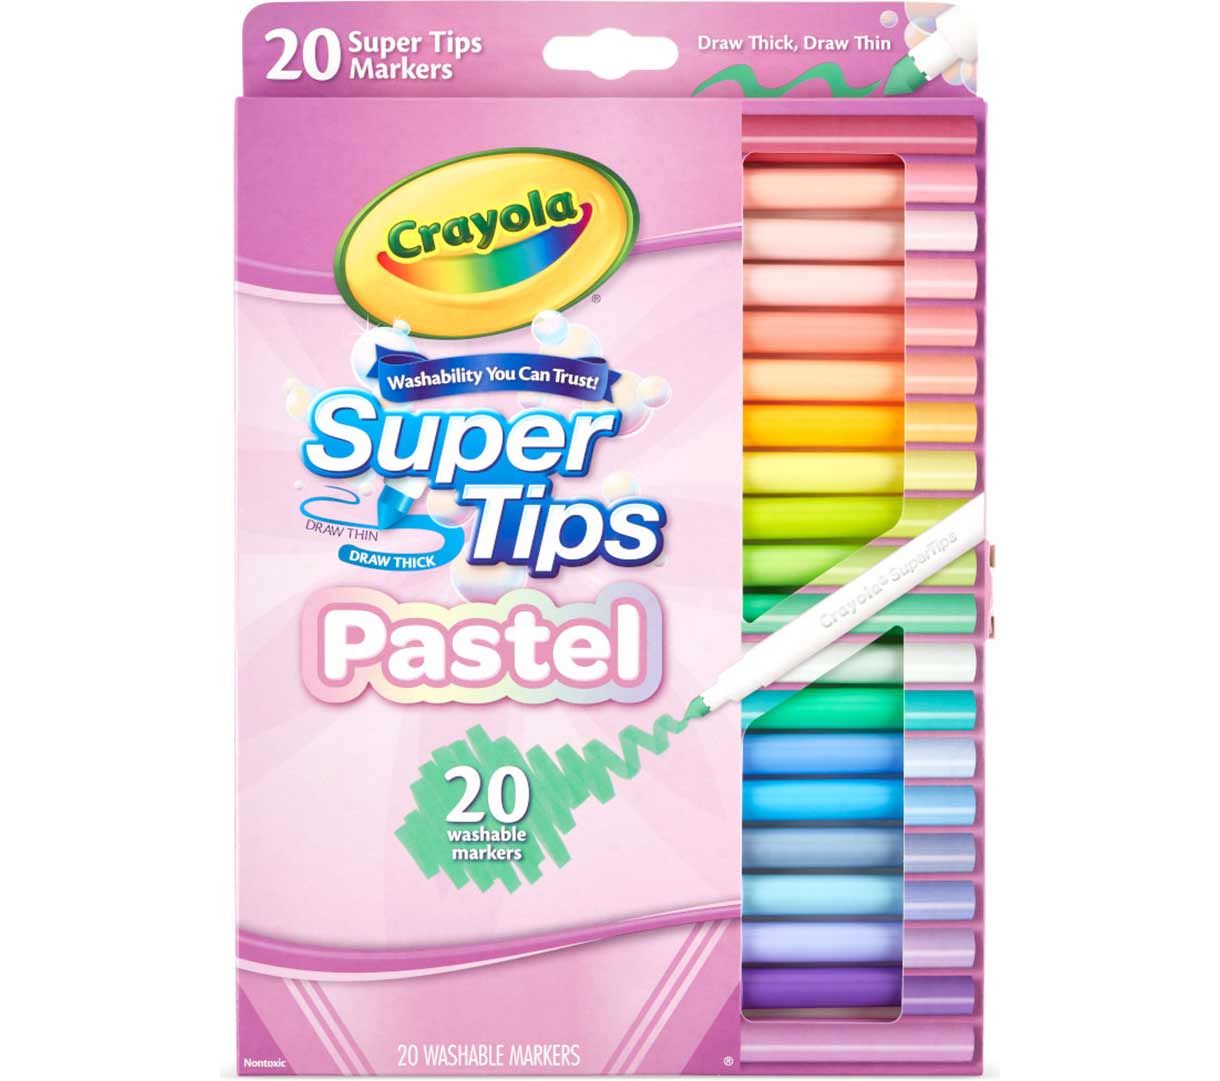 Crayola Super Tips Washable Markers 20 Count Draw Thin or Thick